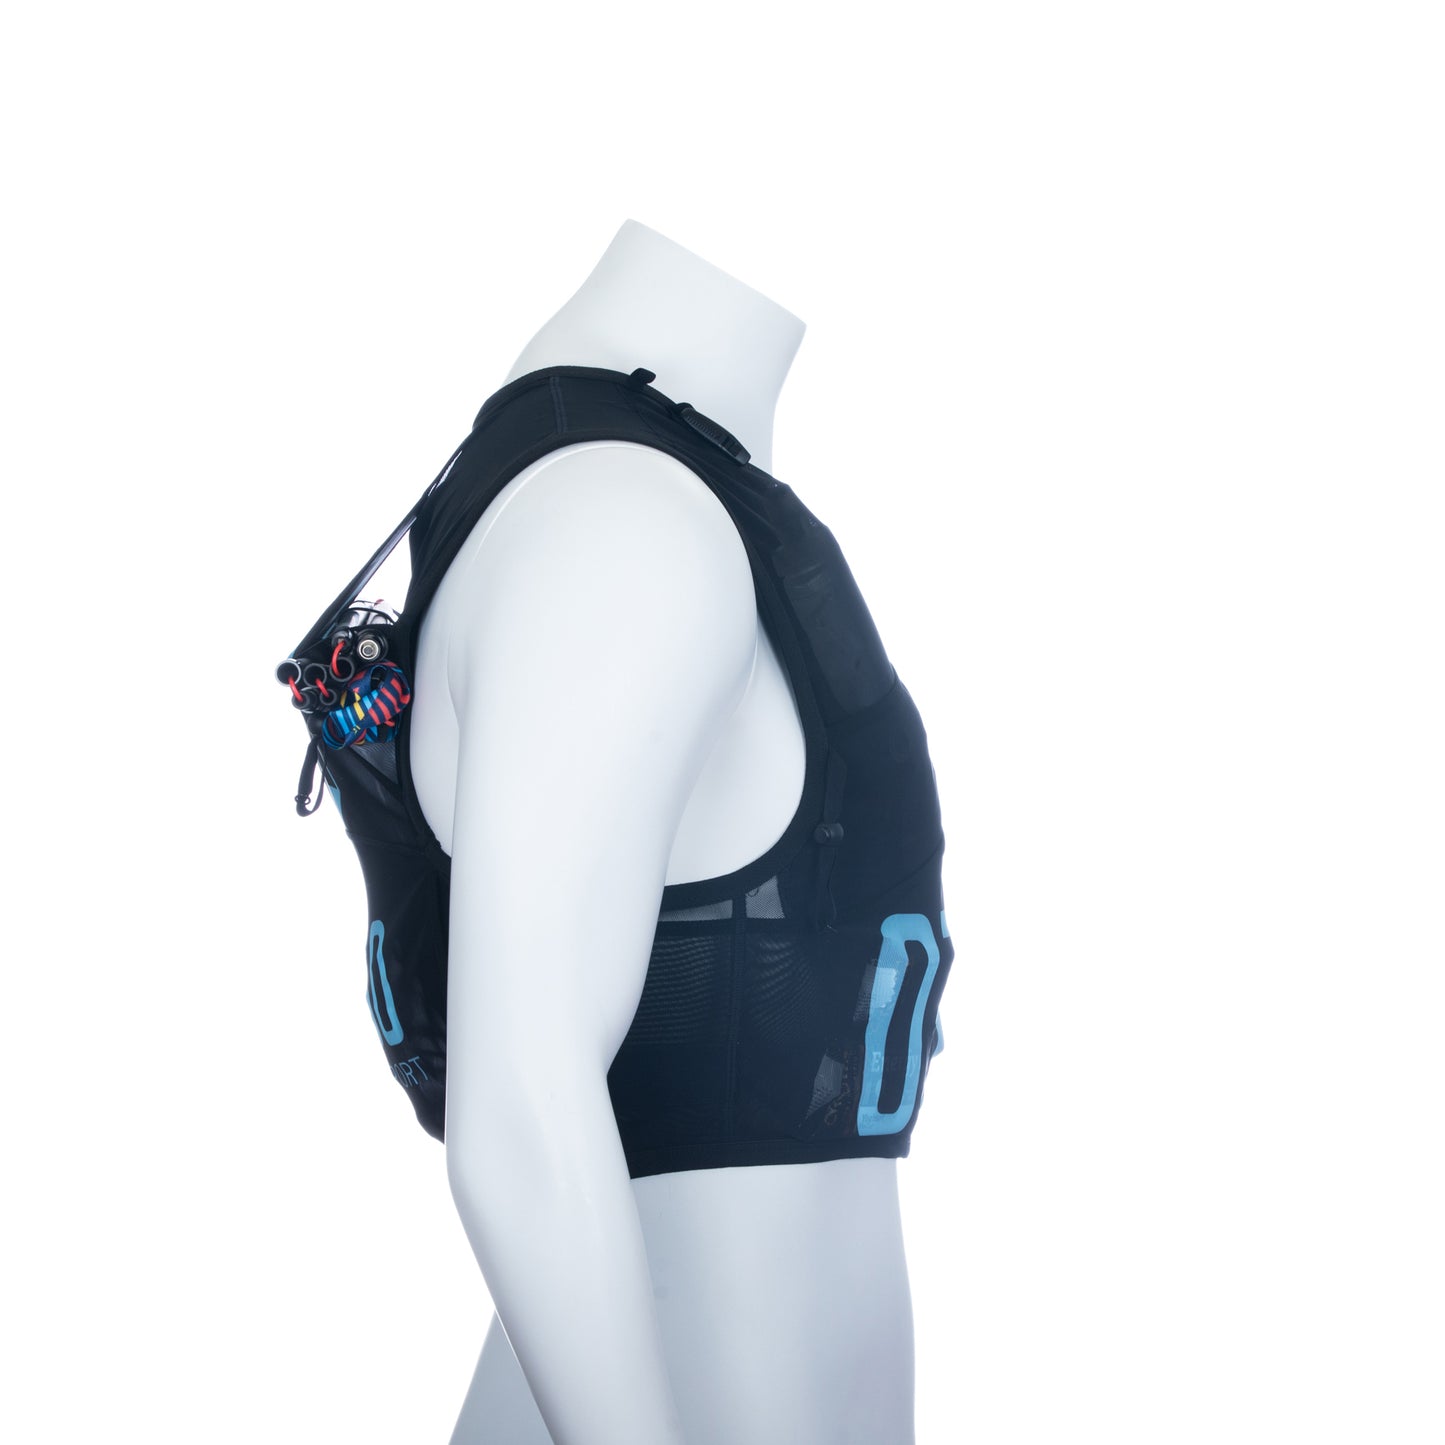 Trail running backpack - Black & Turquoise